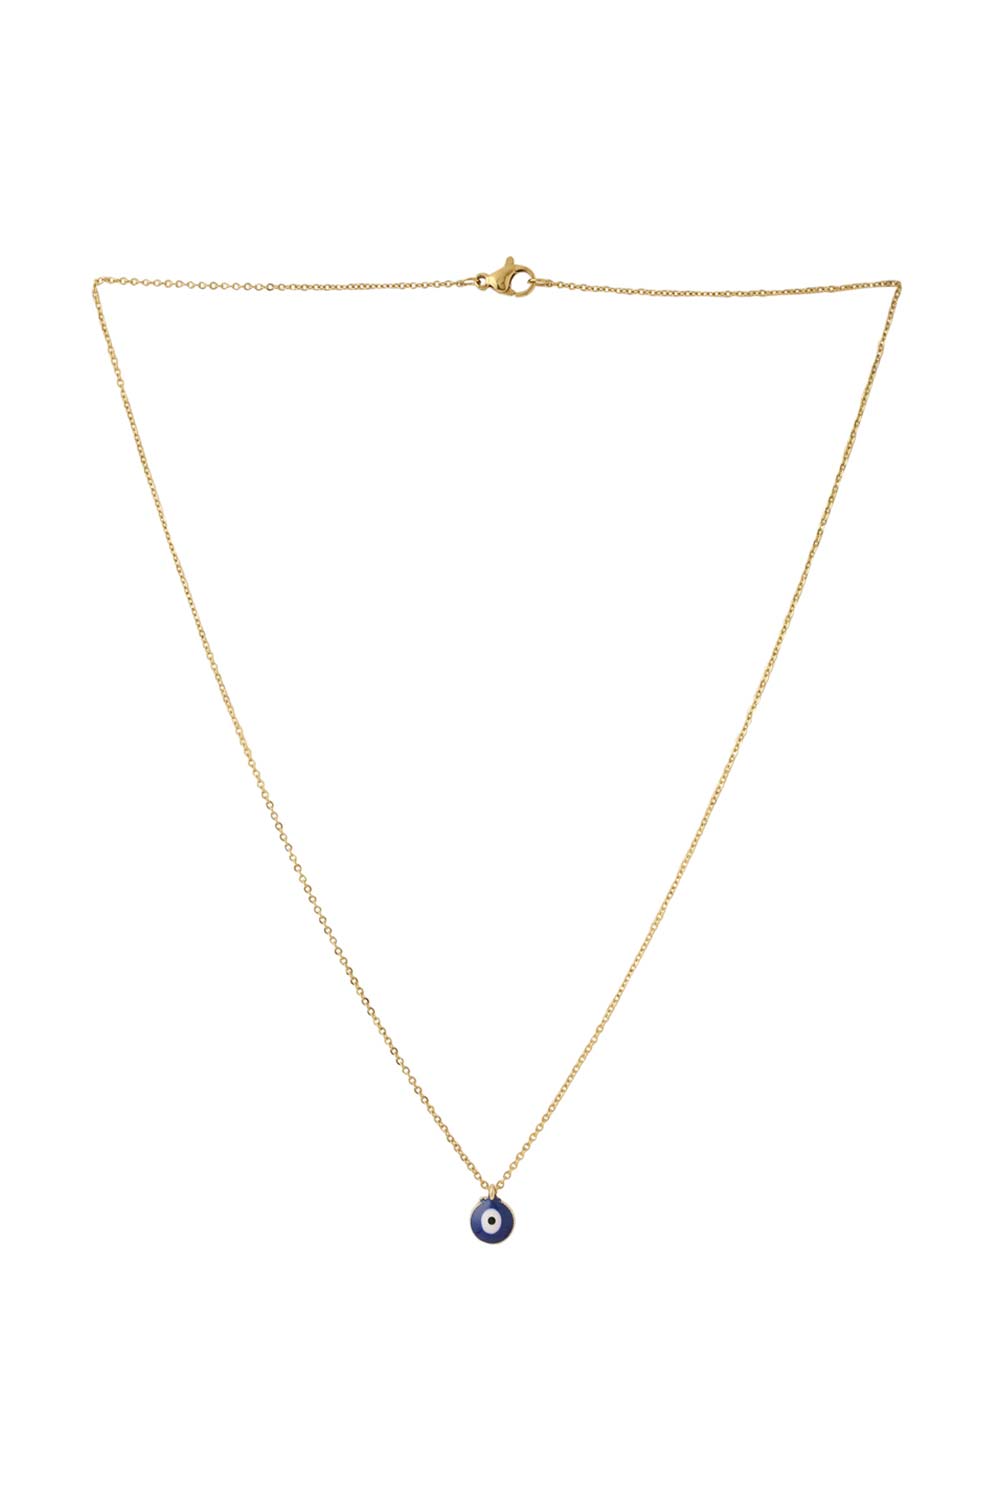 Buy Blue And Evil Eye Necklace Online - Front